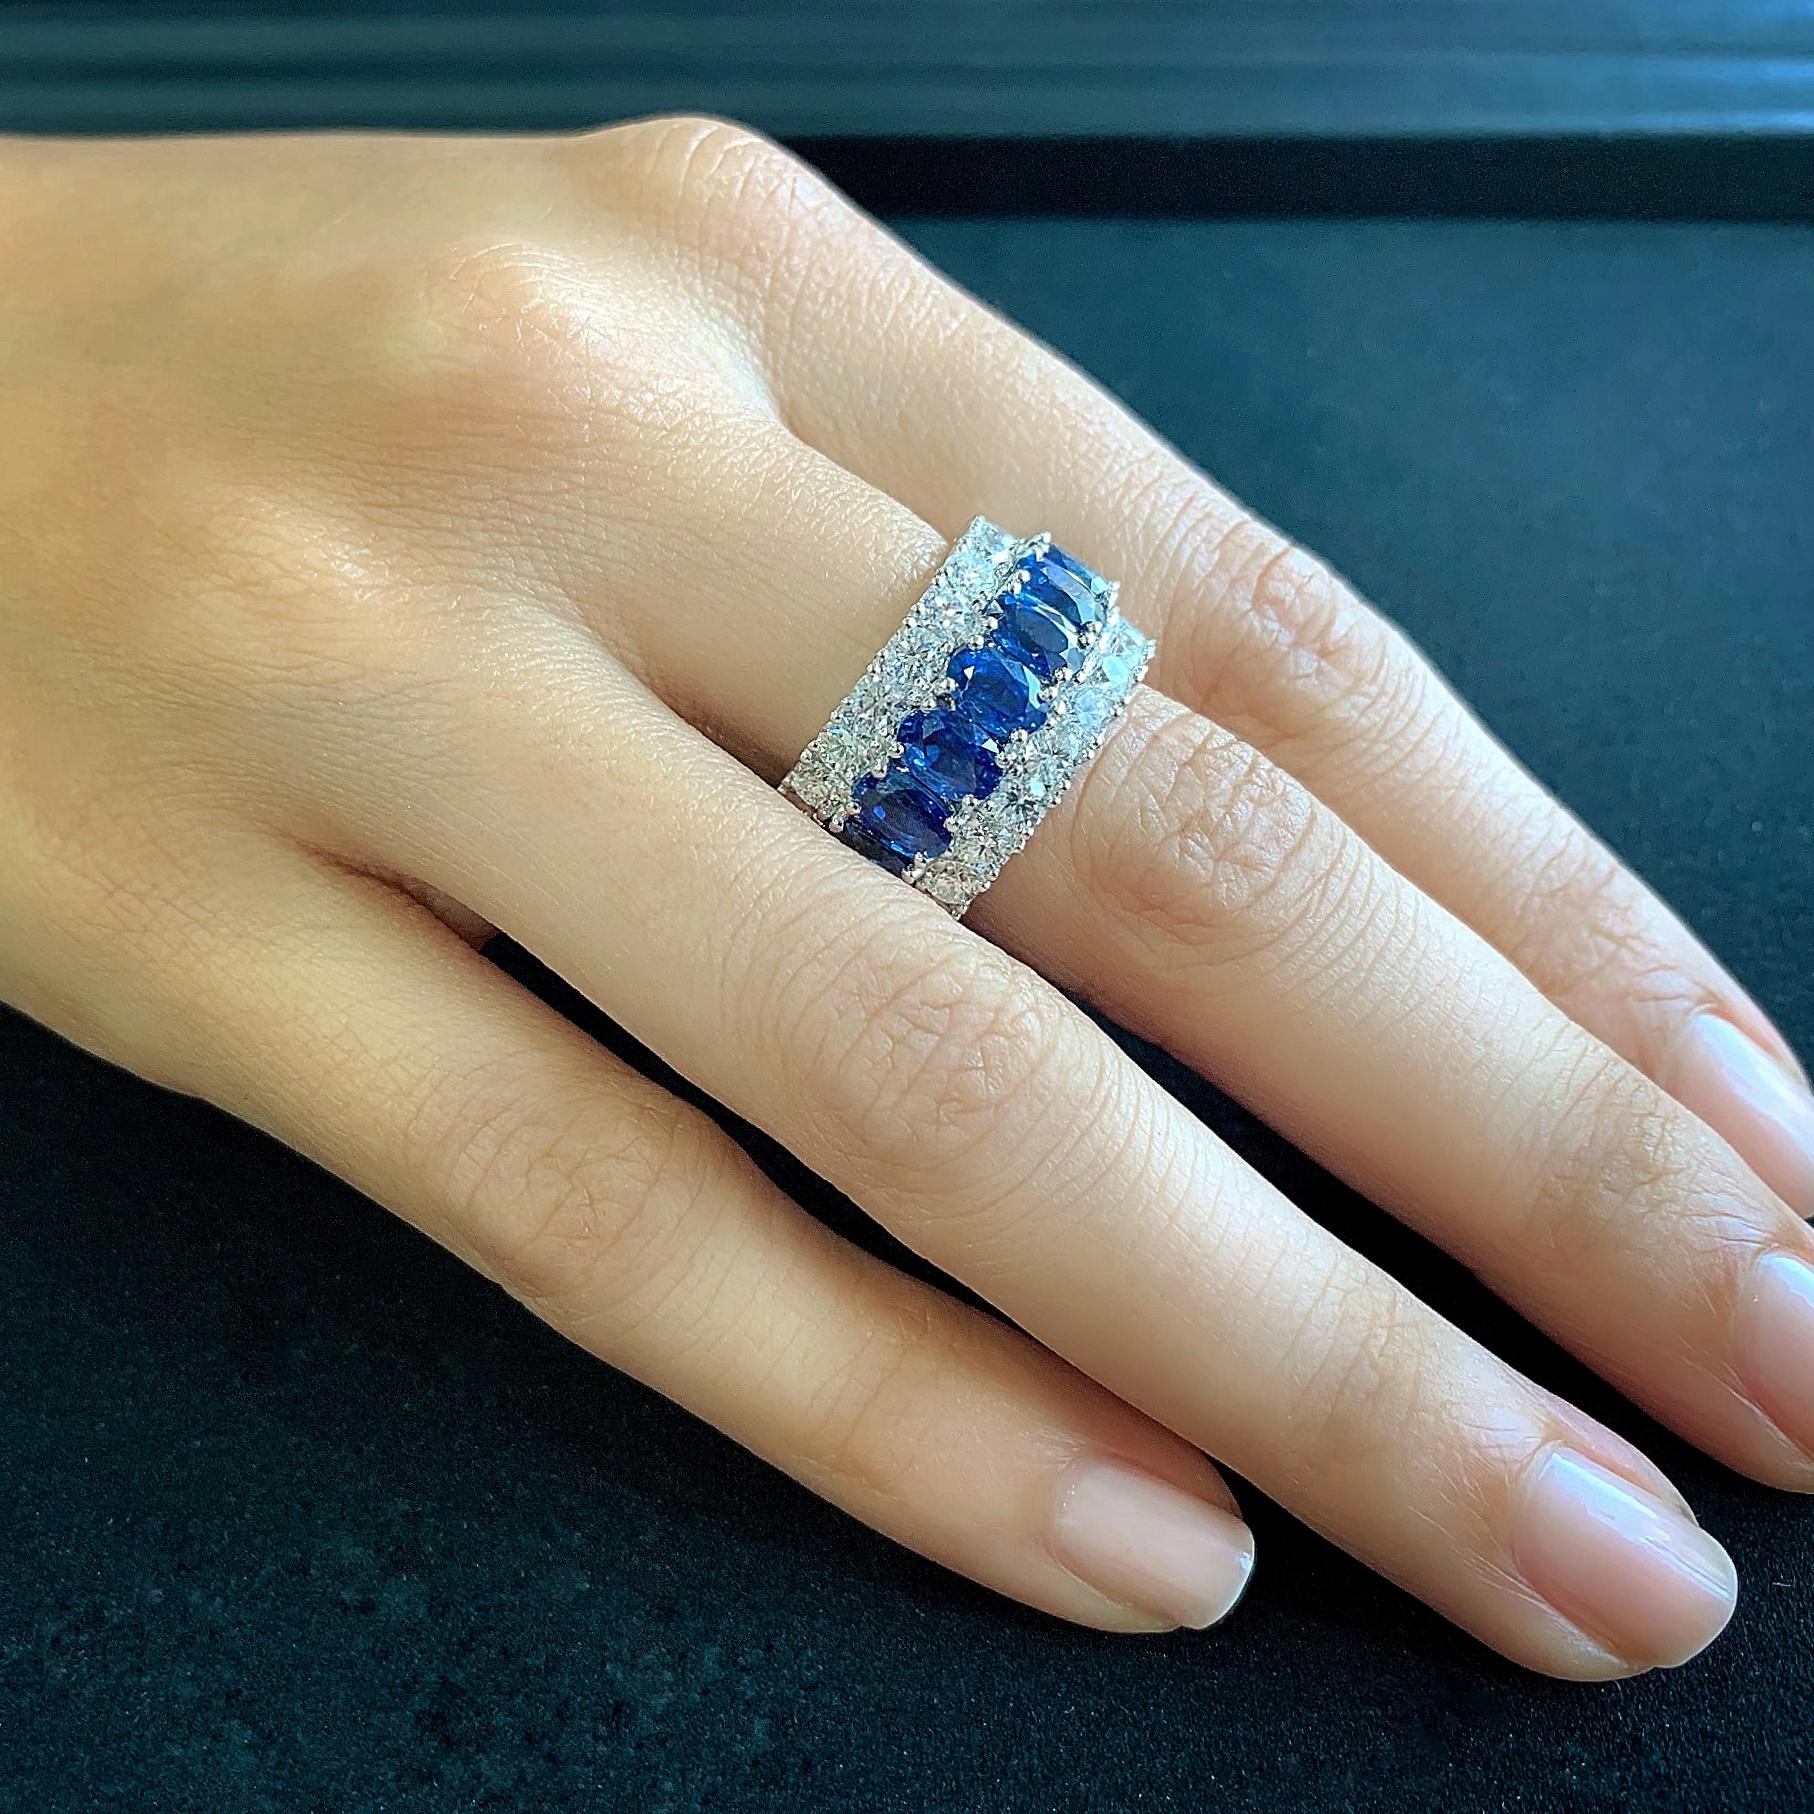 Butani's stunning diamond eternity band ring features a center row of oval blue sapphires (totaling 10.79 carats) and two rows of brilliant-cut round diamonds (totaling 5.01 carats).  Set in 18K white gold.  A classic and timeless piece.  Currently